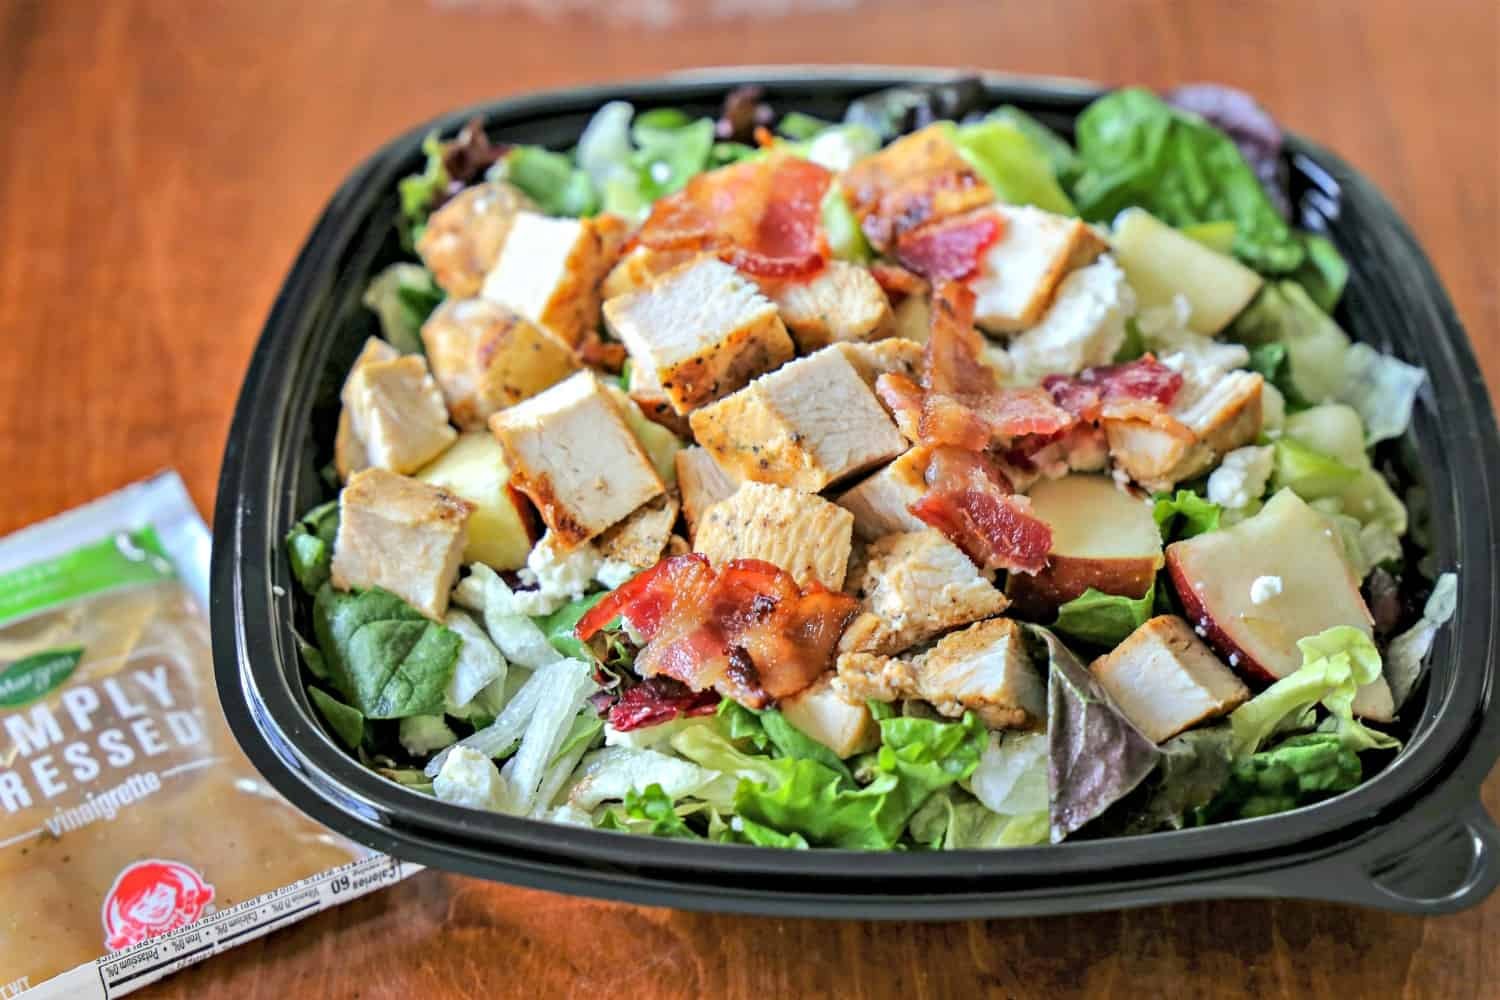 20-pdq-grilled-chicken-salad-nutrition-facts